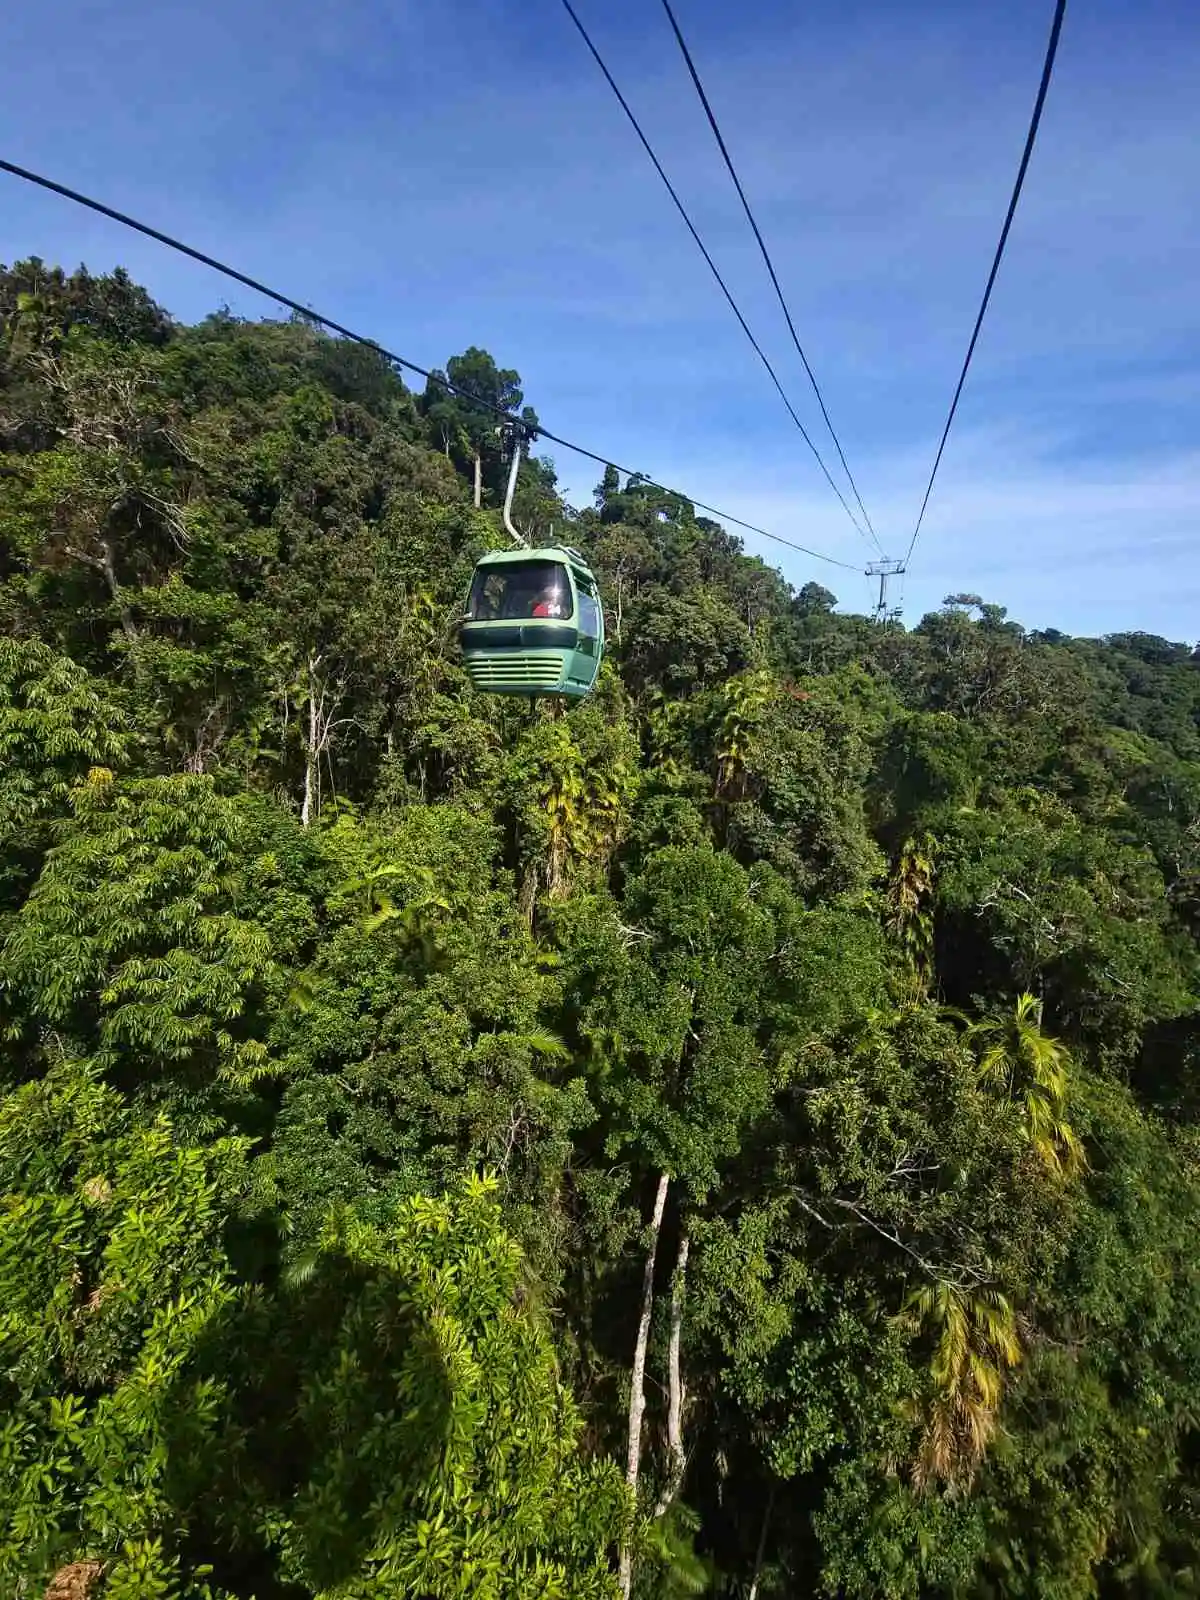 A gondola glides up a lush green mountainside on a cableway.